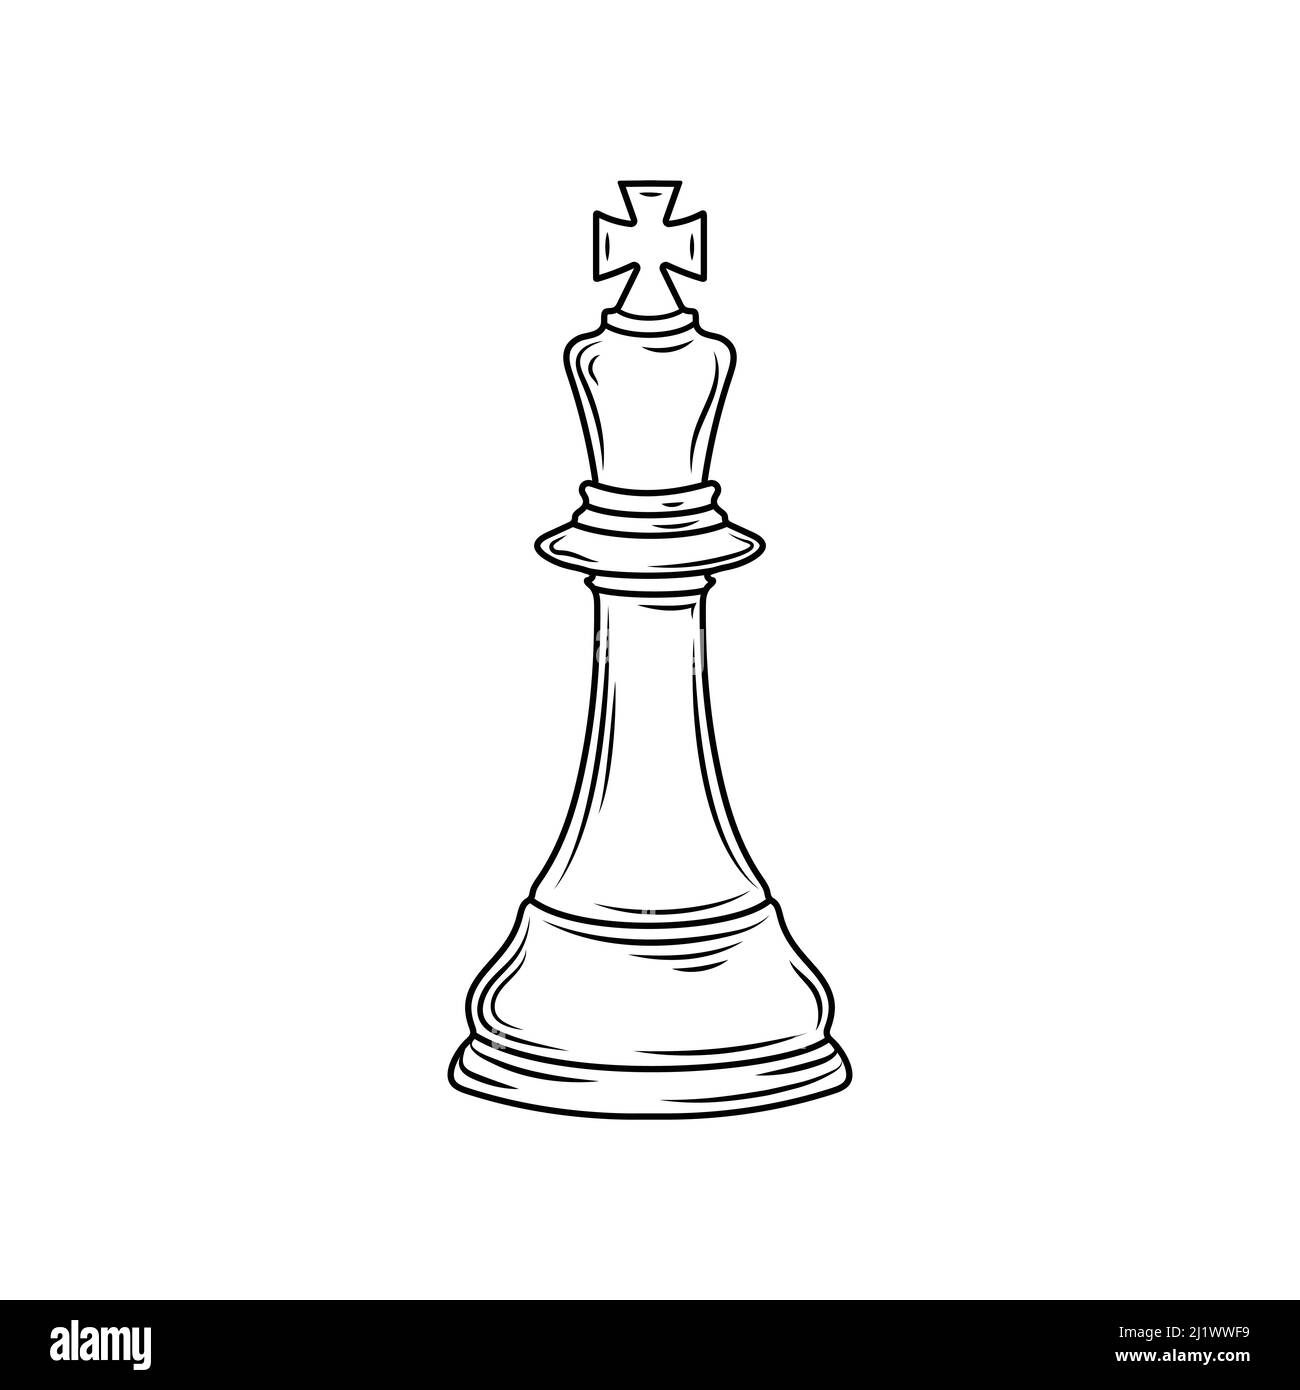 Chess pieces sketch hi-res stock photography and images - Alamy